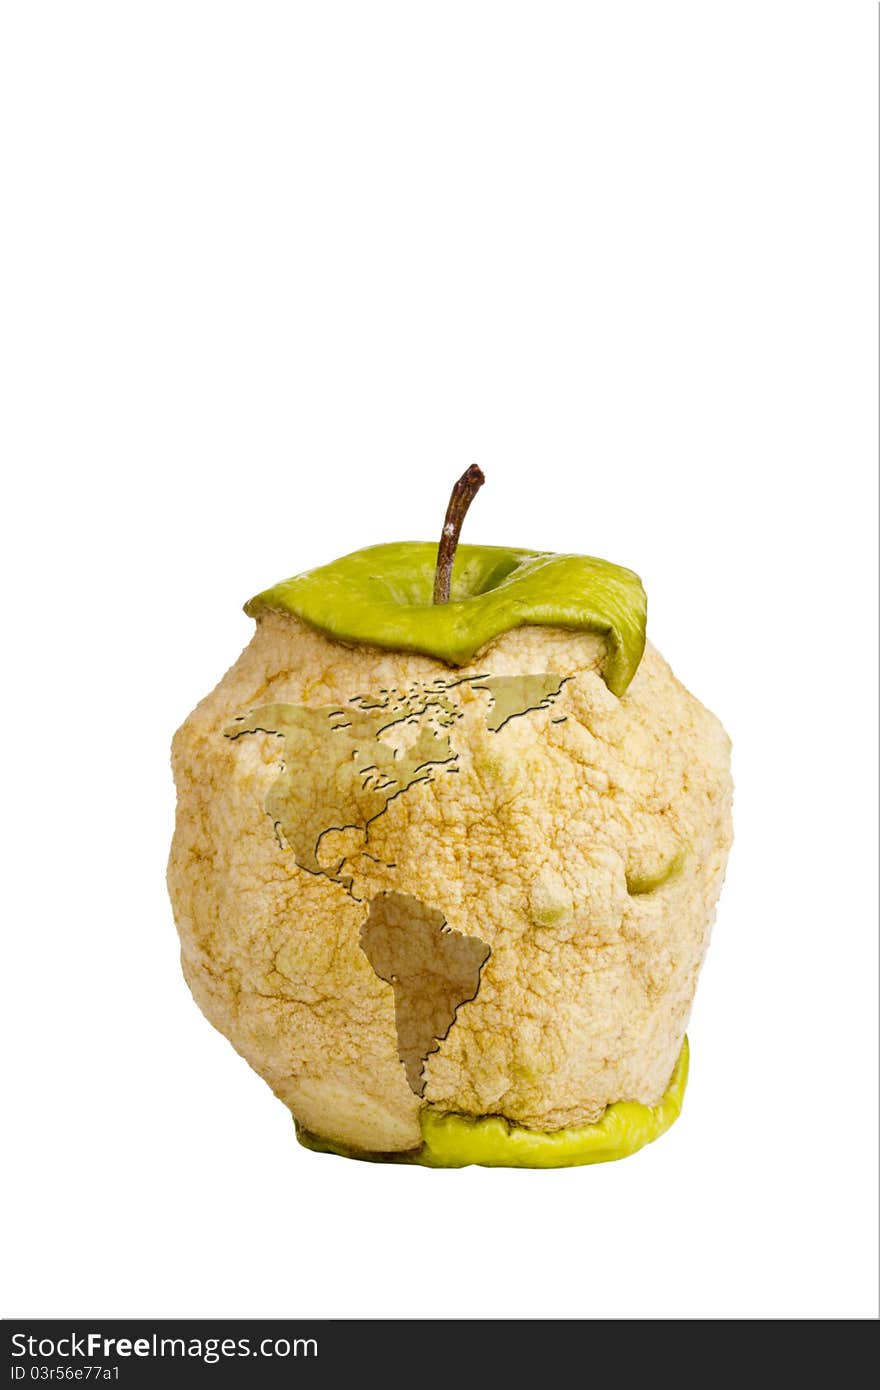 Decaying green Granny Smith apple with a silhouette of an earth isolated on a white background. Decaying green Granny Smith apple with a silhouette of an earth isolated on a white background.